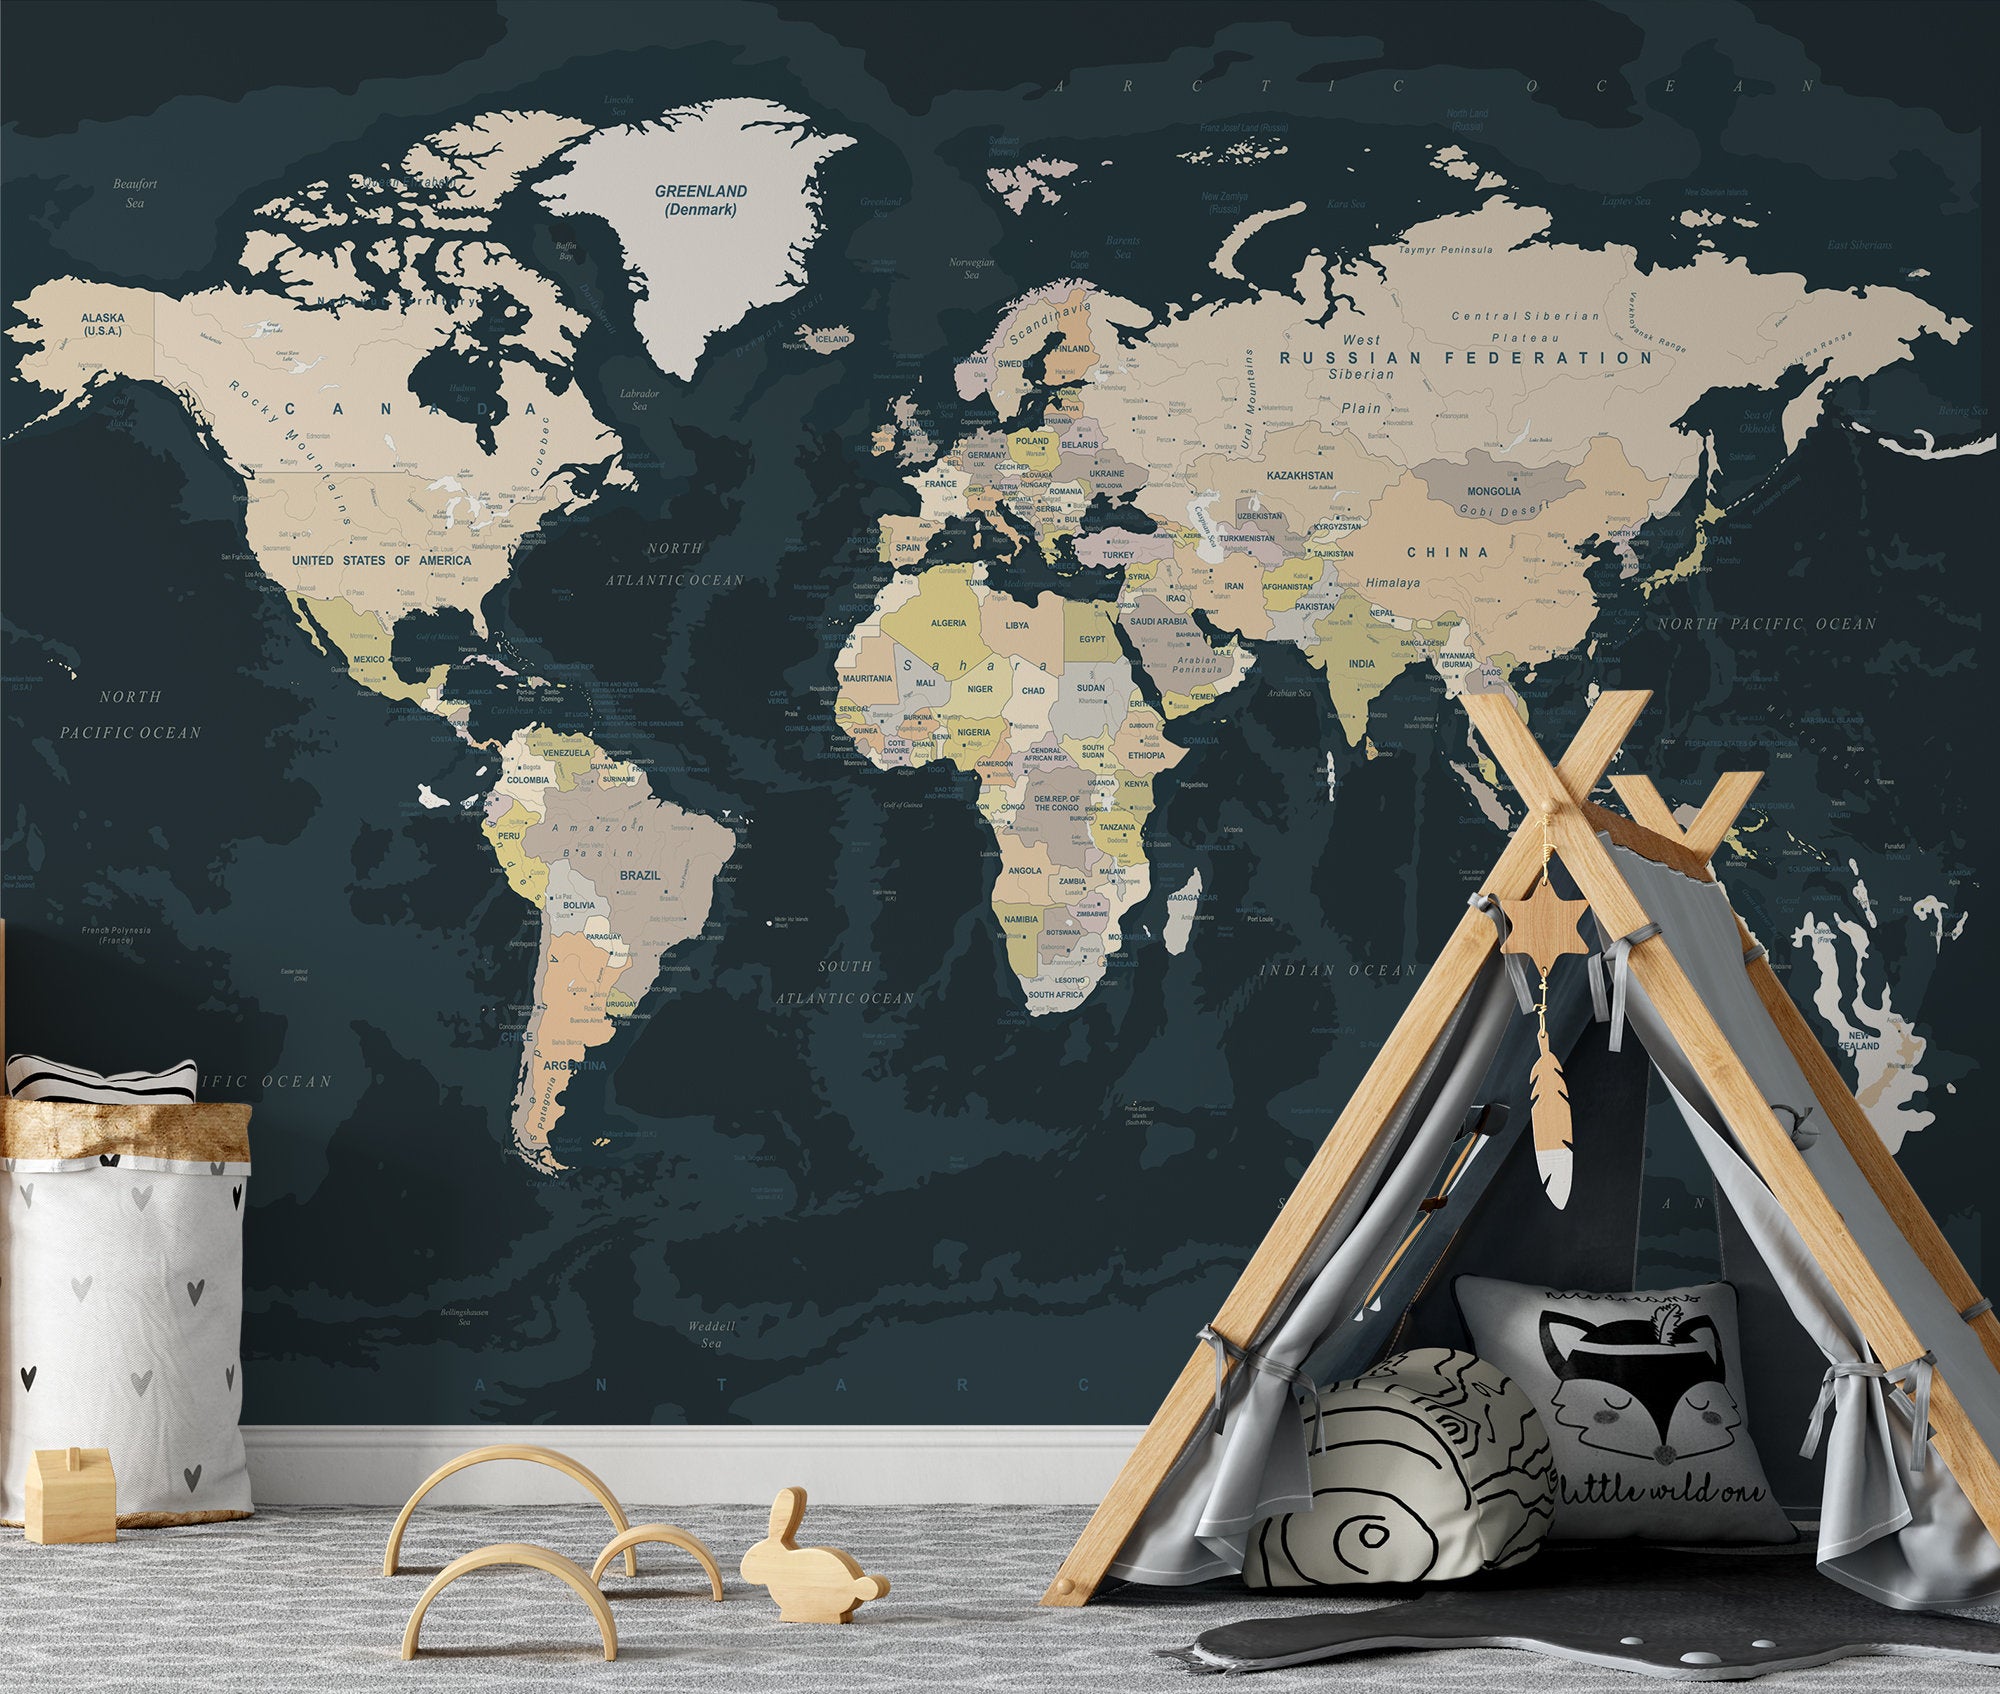 World Map on the Dark Blue Background Wallpaper Self Adhesive Peel and Stick Wall Sticker Wall Decoration Removable